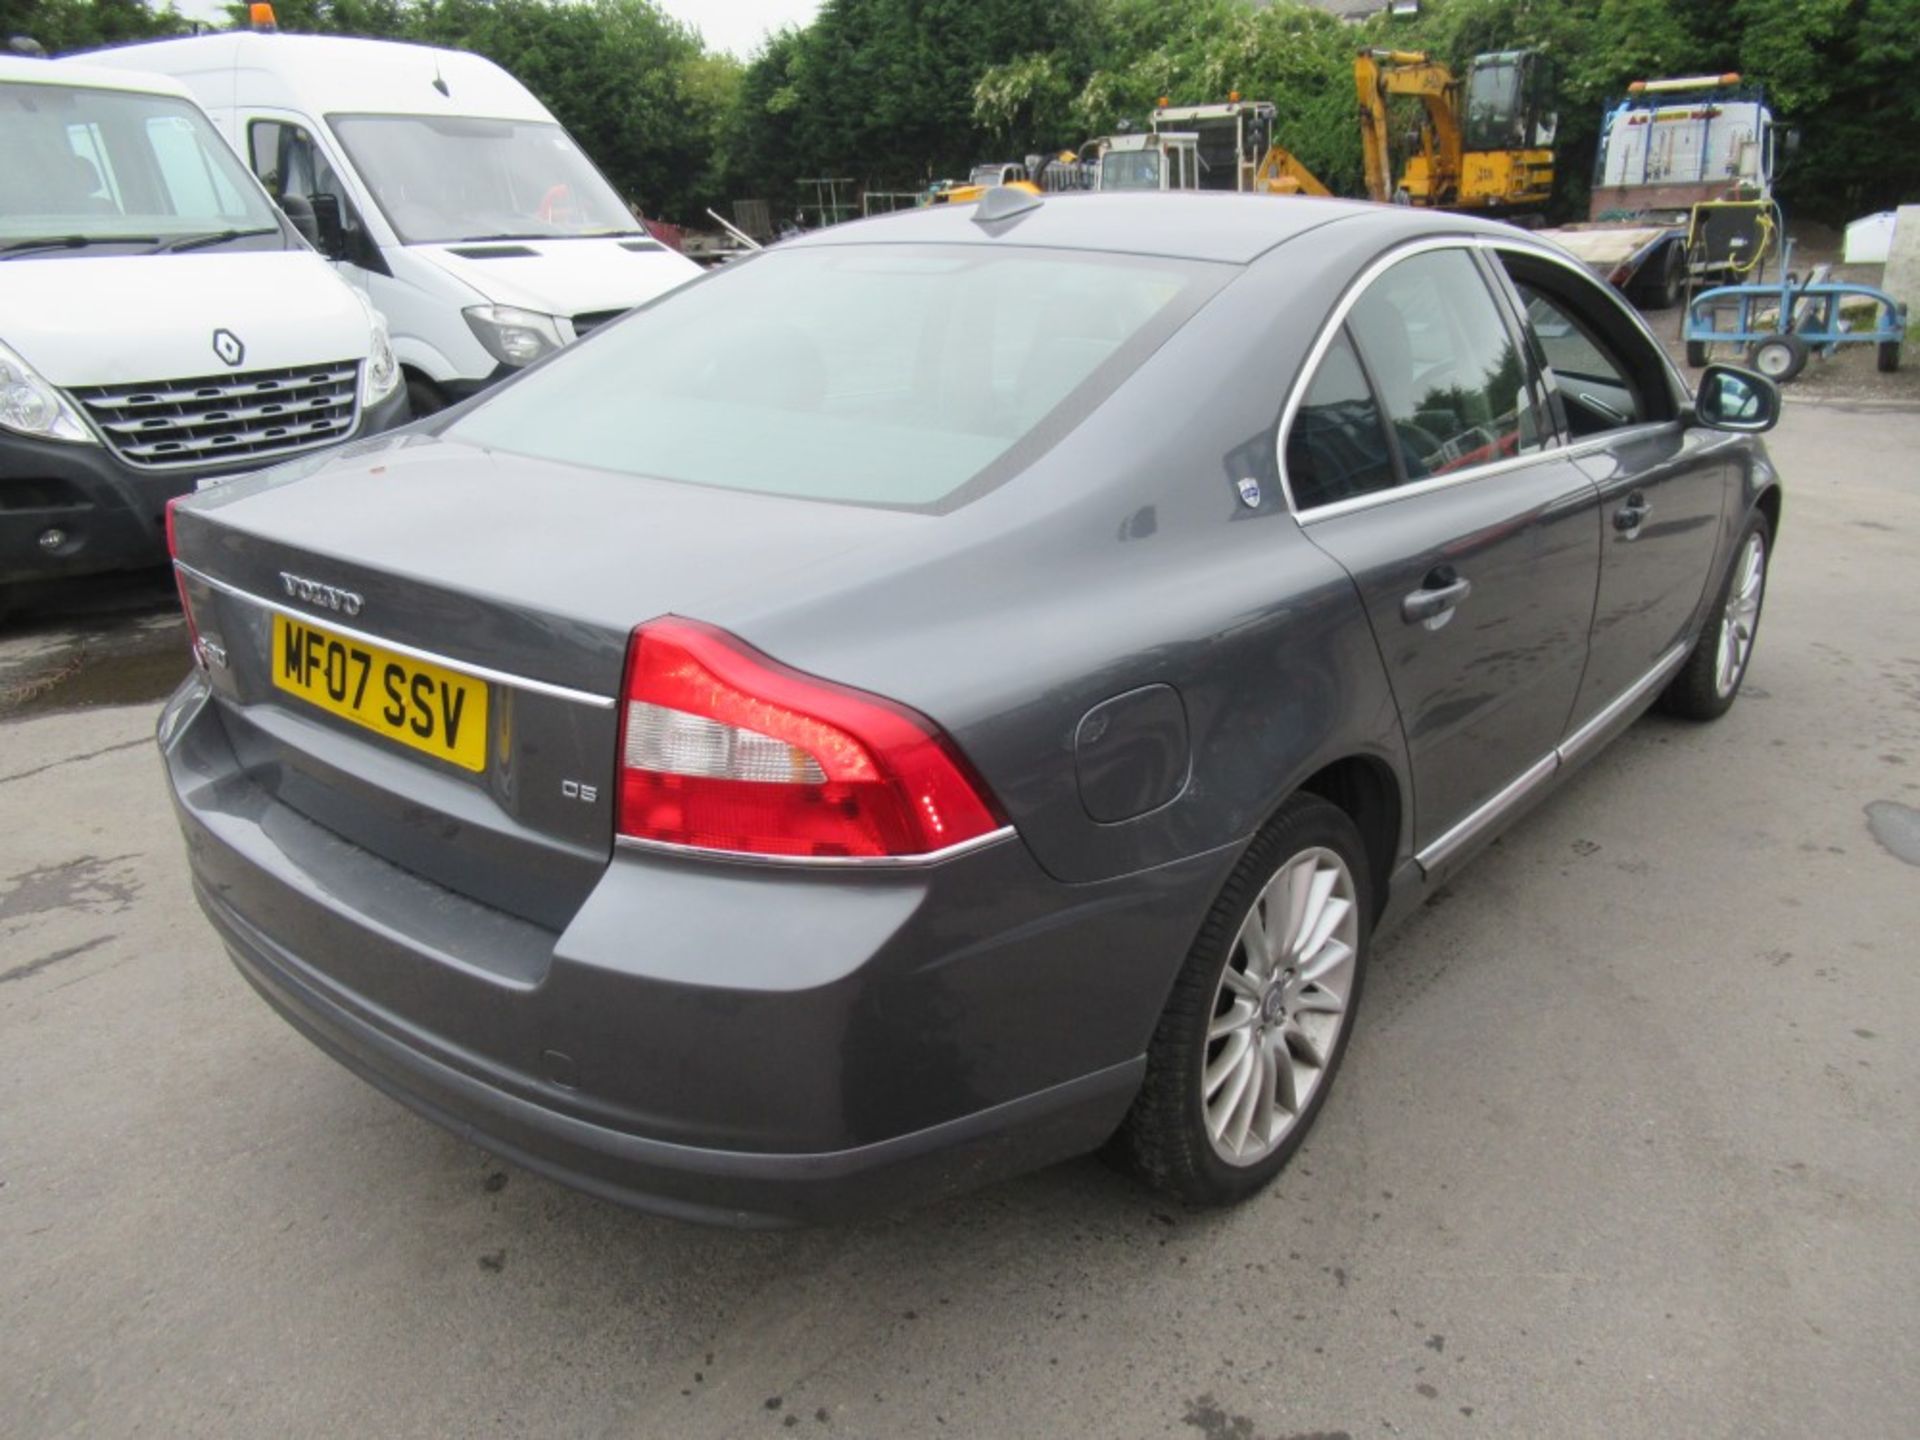 07 reg VOLVO S80 EXECUTIVE DS A (DIRECT COUNCIL) 1ST REG 03/07, TEST 03/20, 84492M, V5 HERE, 1 - Image 4 of 5